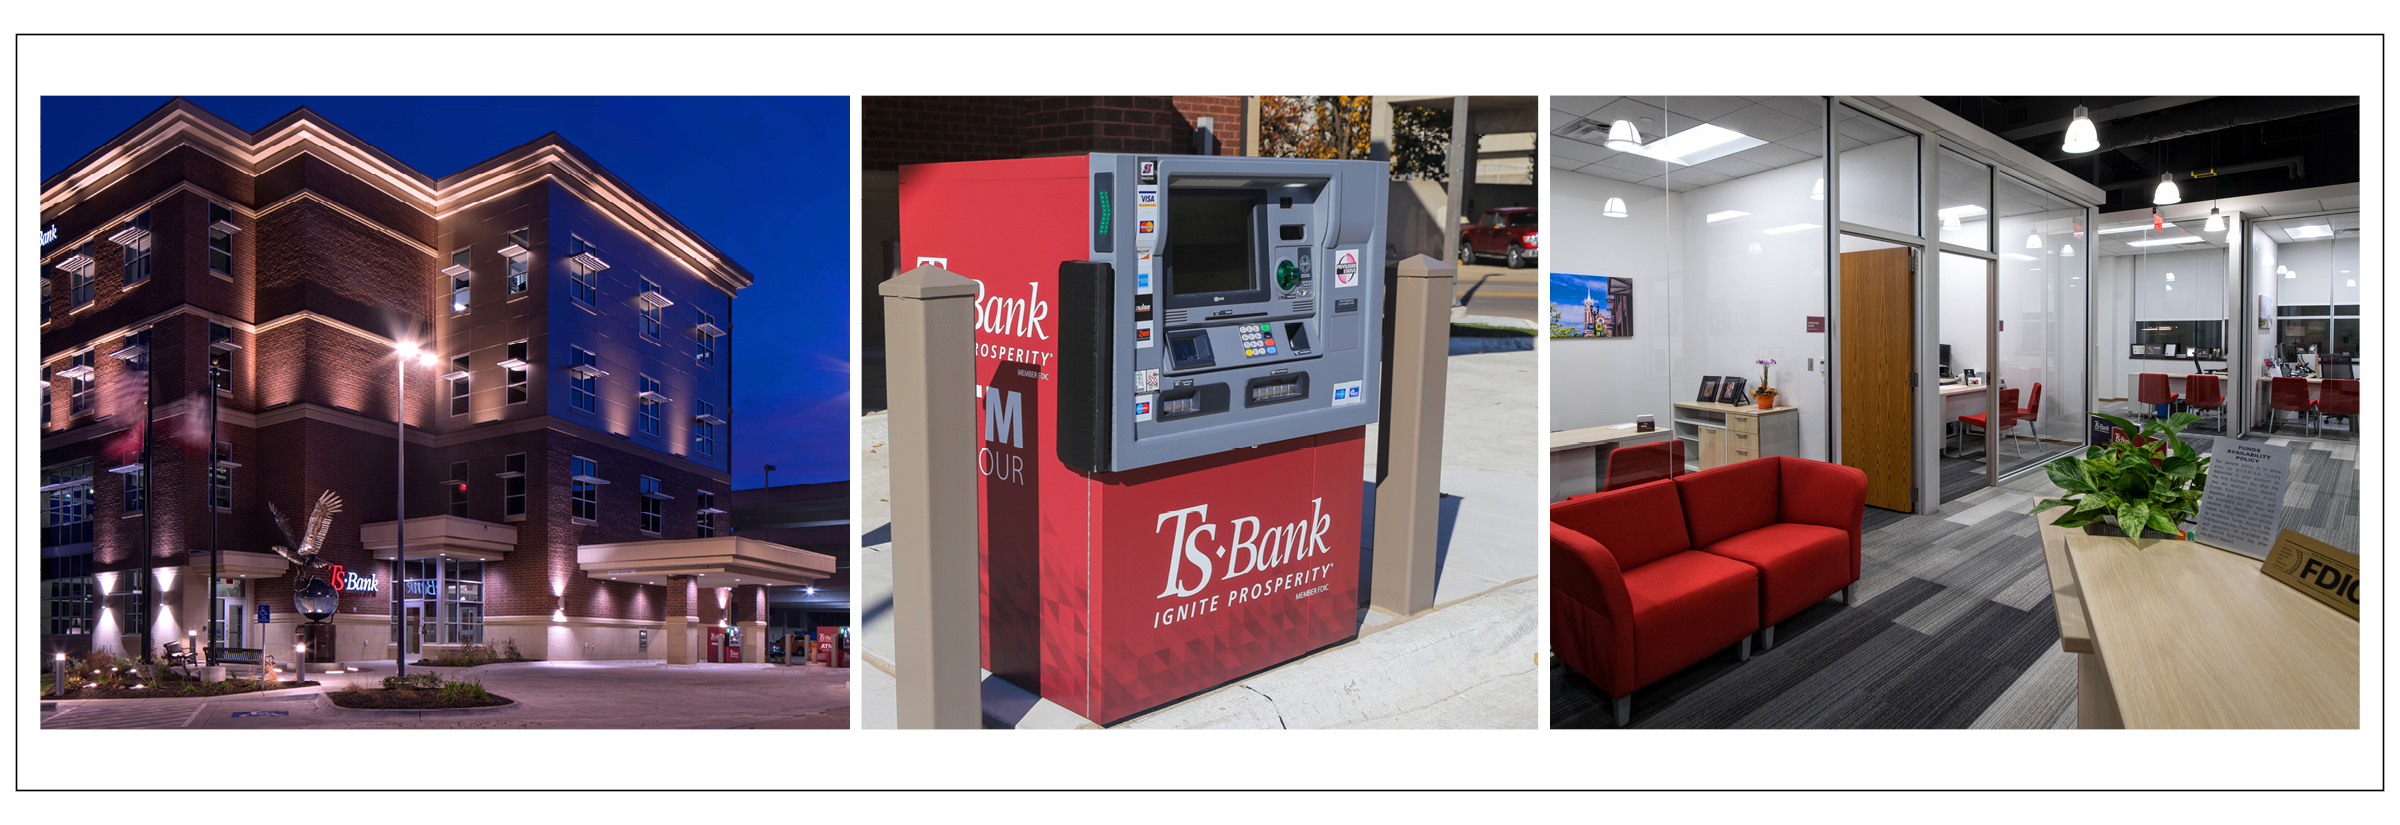 exterior and interior images of ts bank downtown council bluffs location